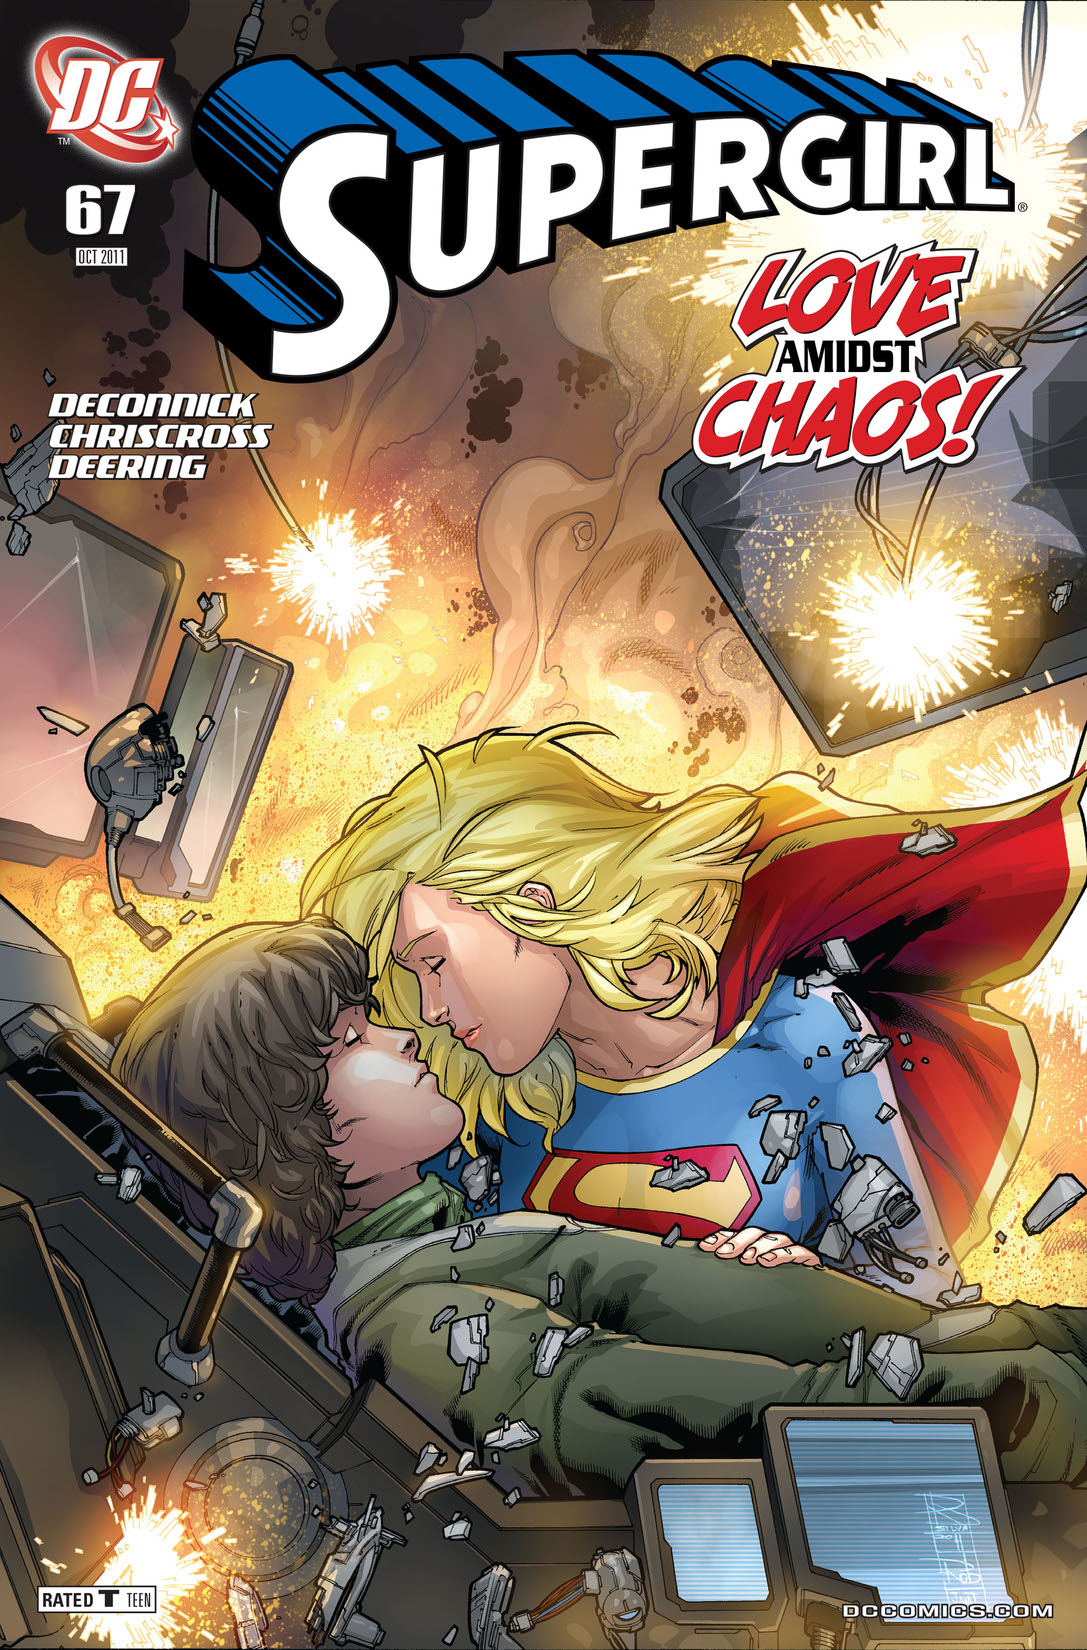 Supergirl (2005-) #67 preview images